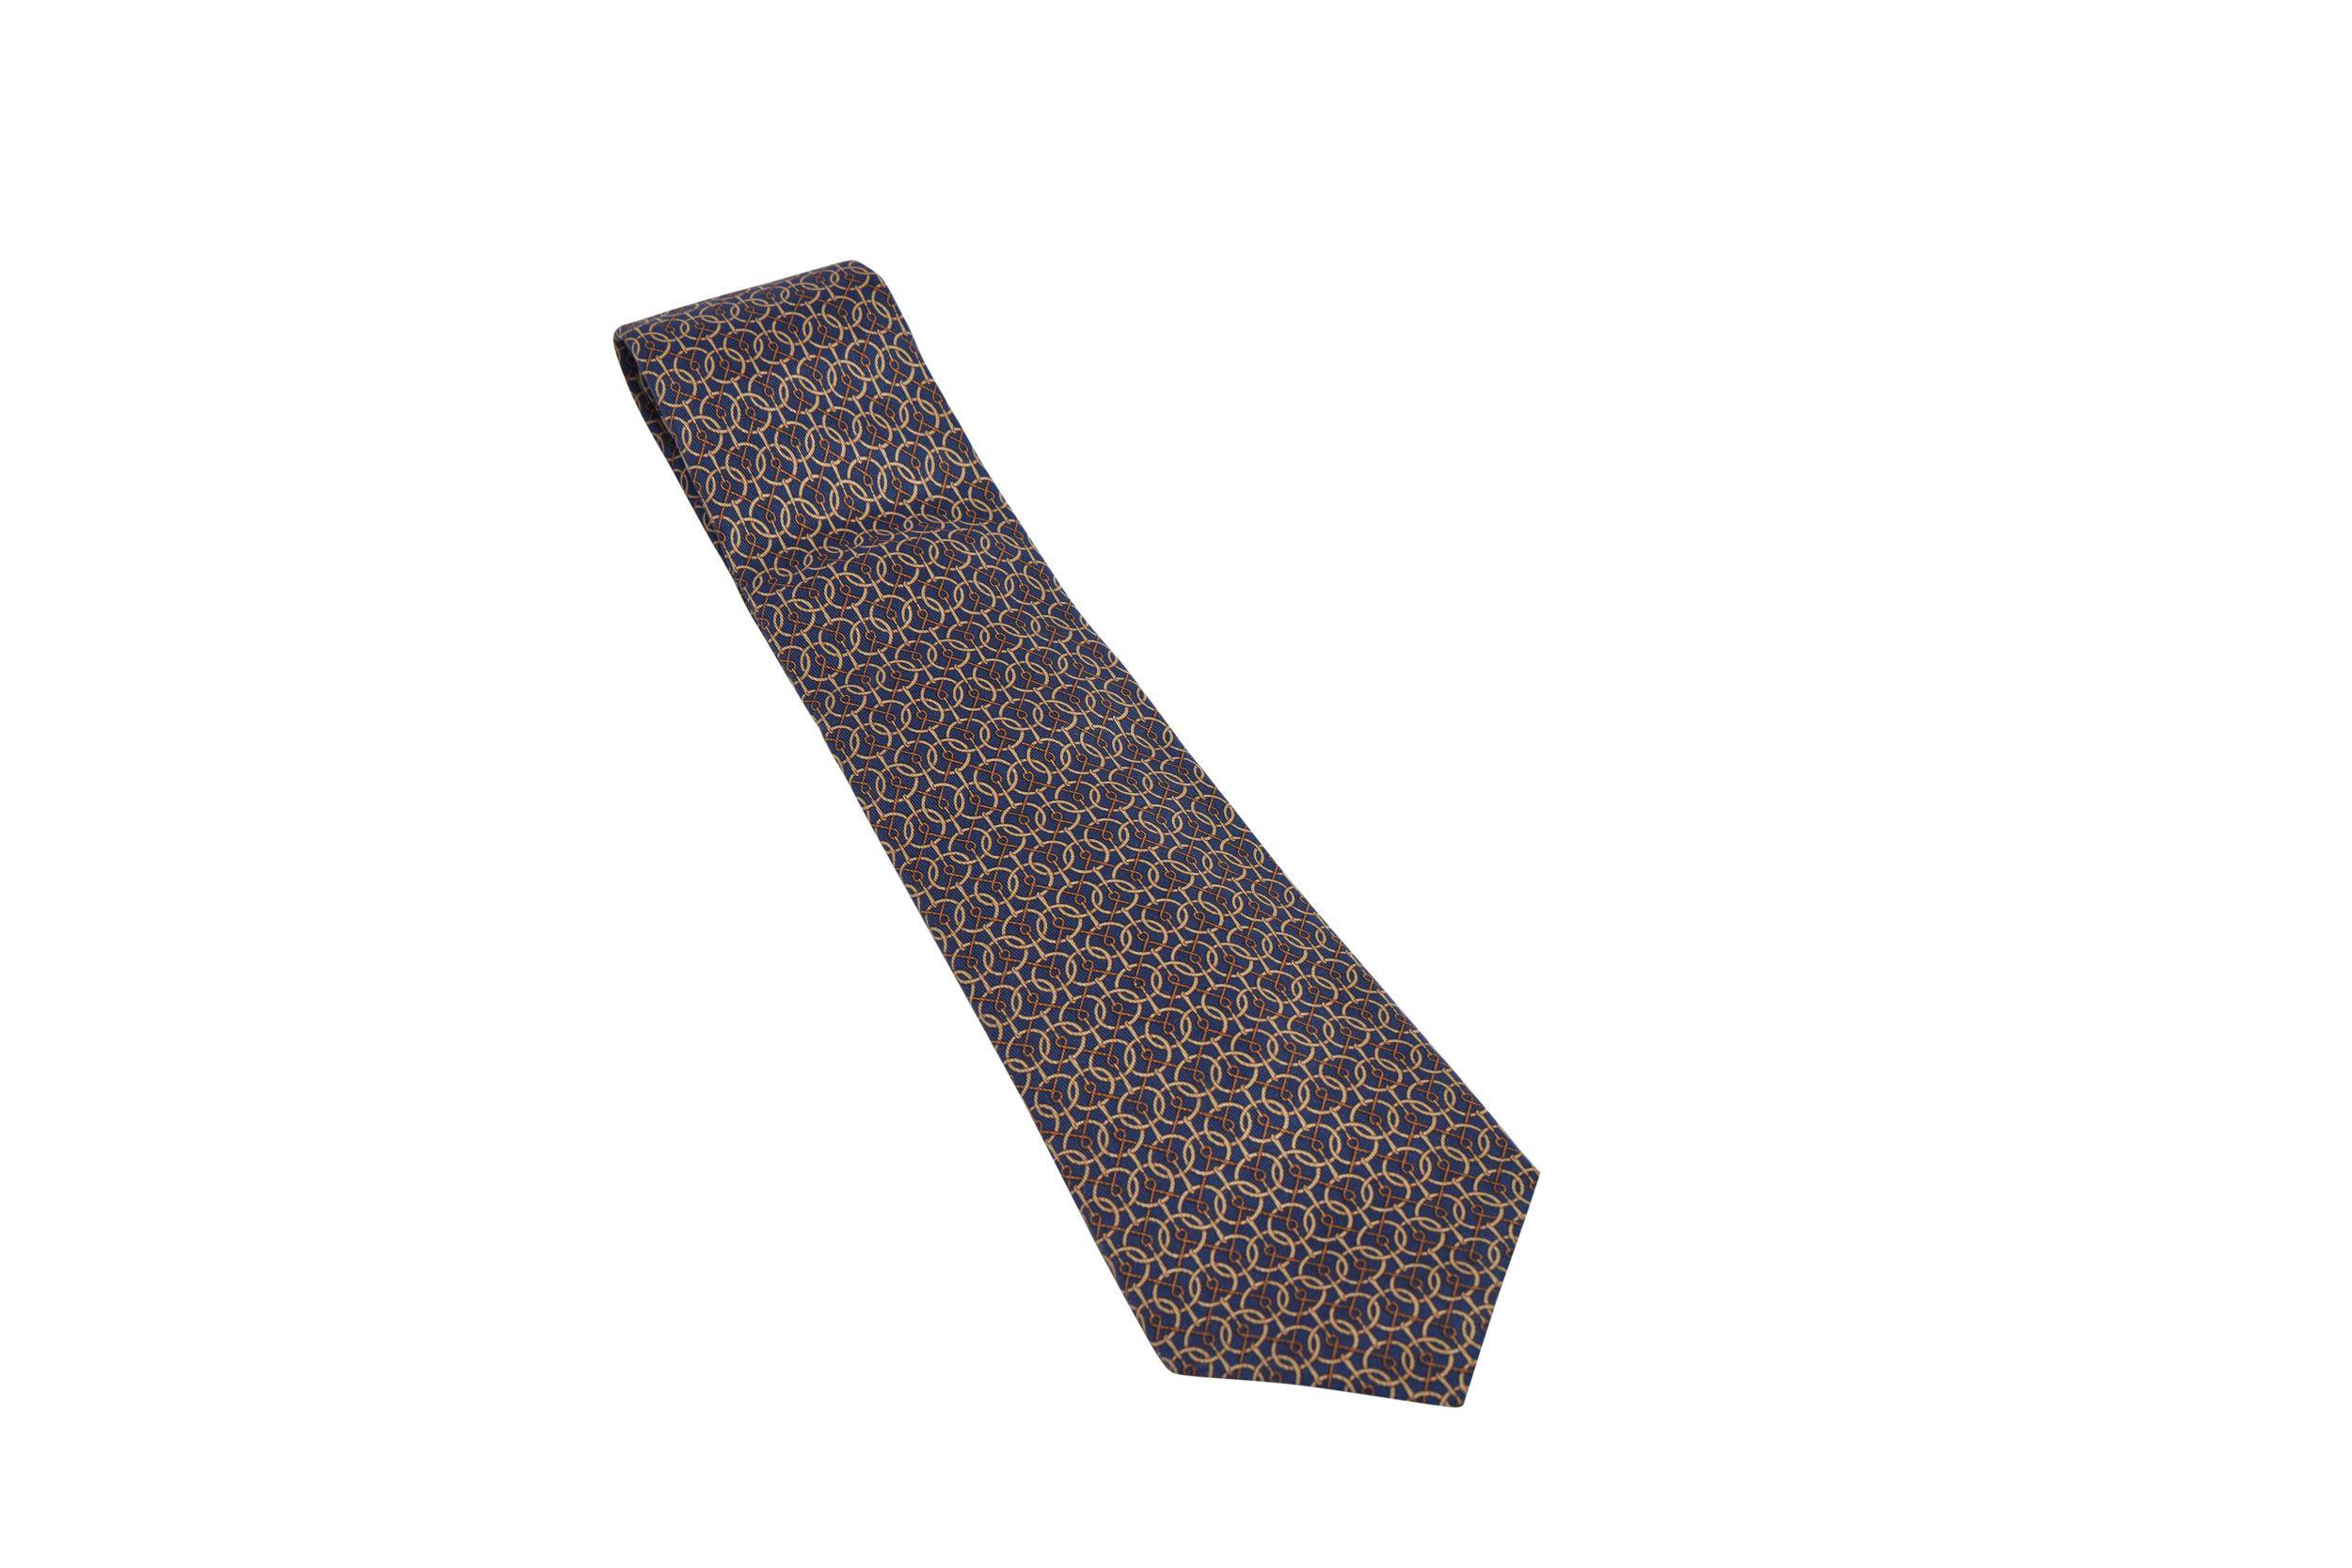 Hermes dark blue silk tie with gold and brown horse pattern Blue lining Comes with original box